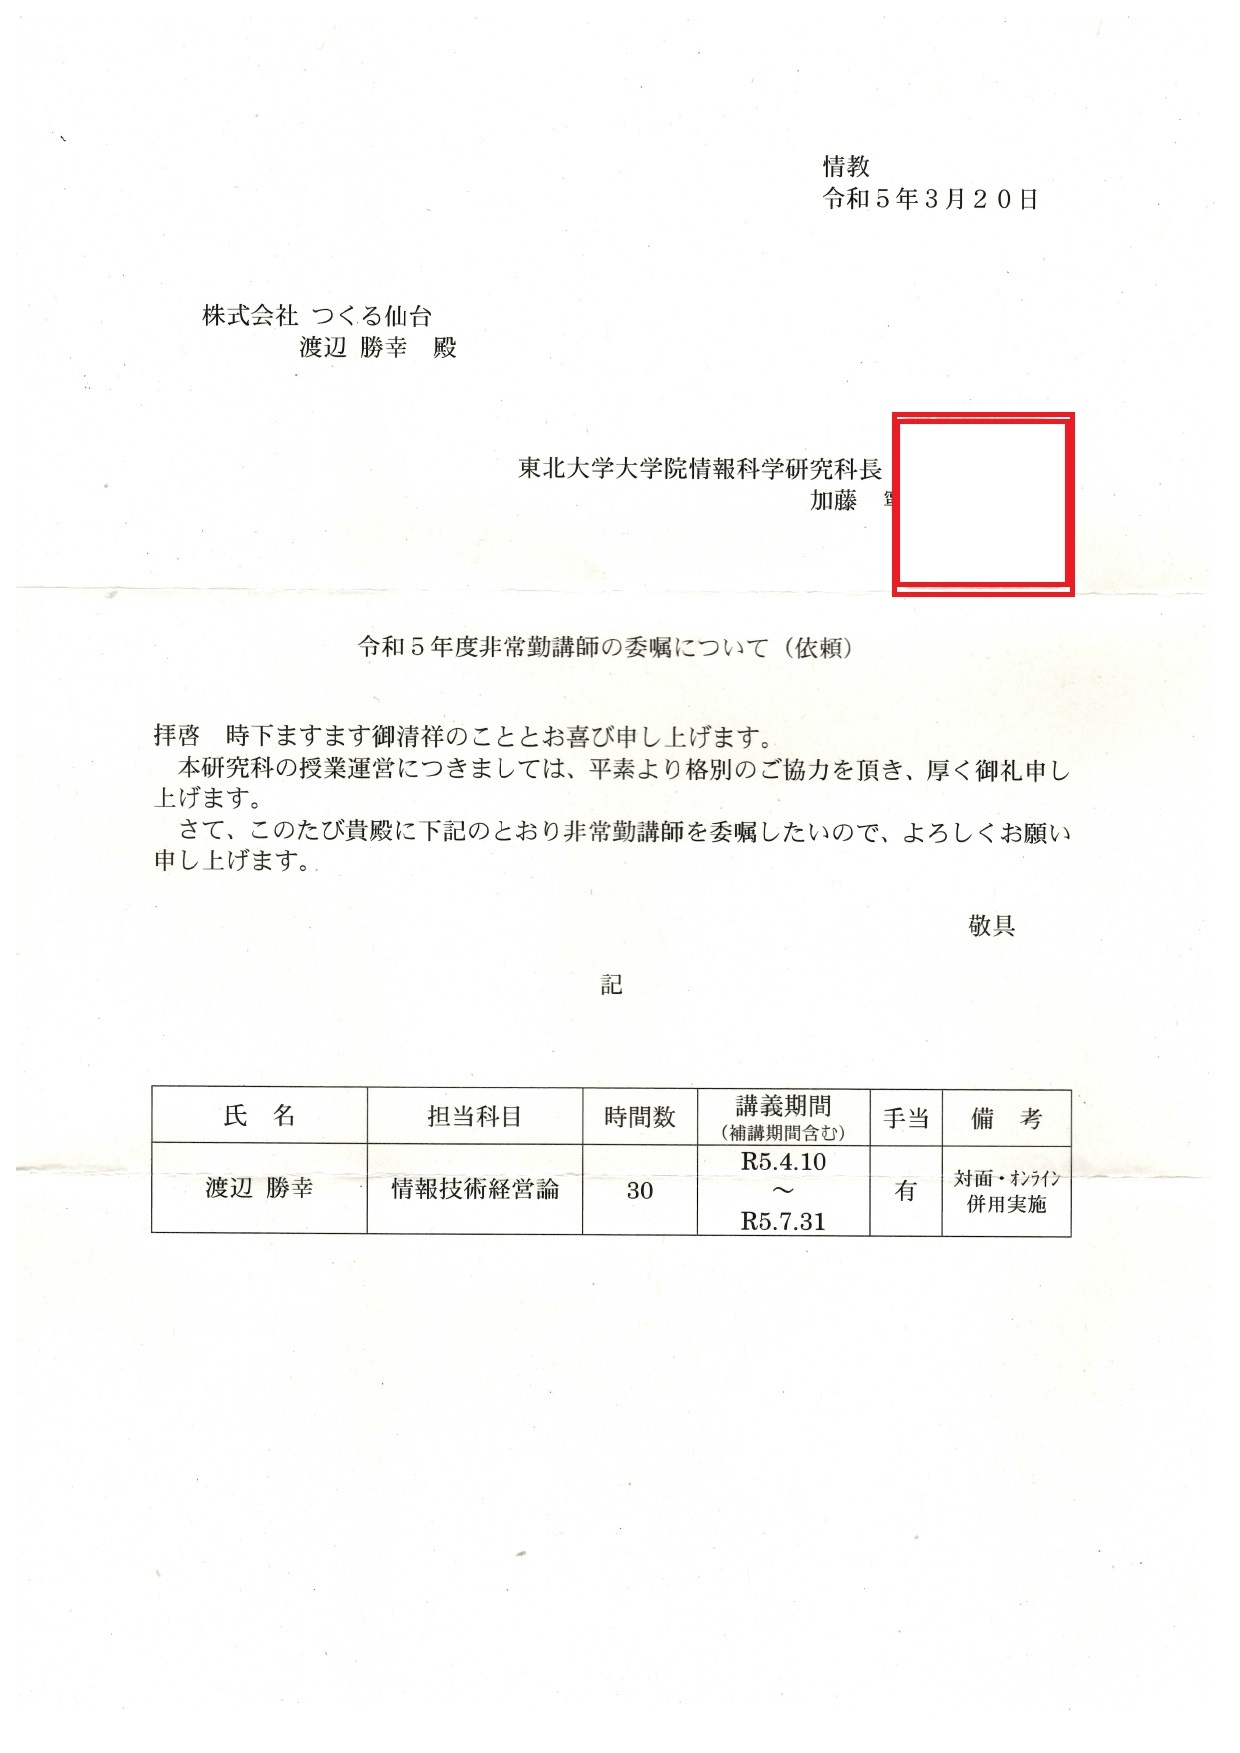 R503242122 令和5年度非常勤講師の委嘱について（依頼）令和5年3月20日_page-0001